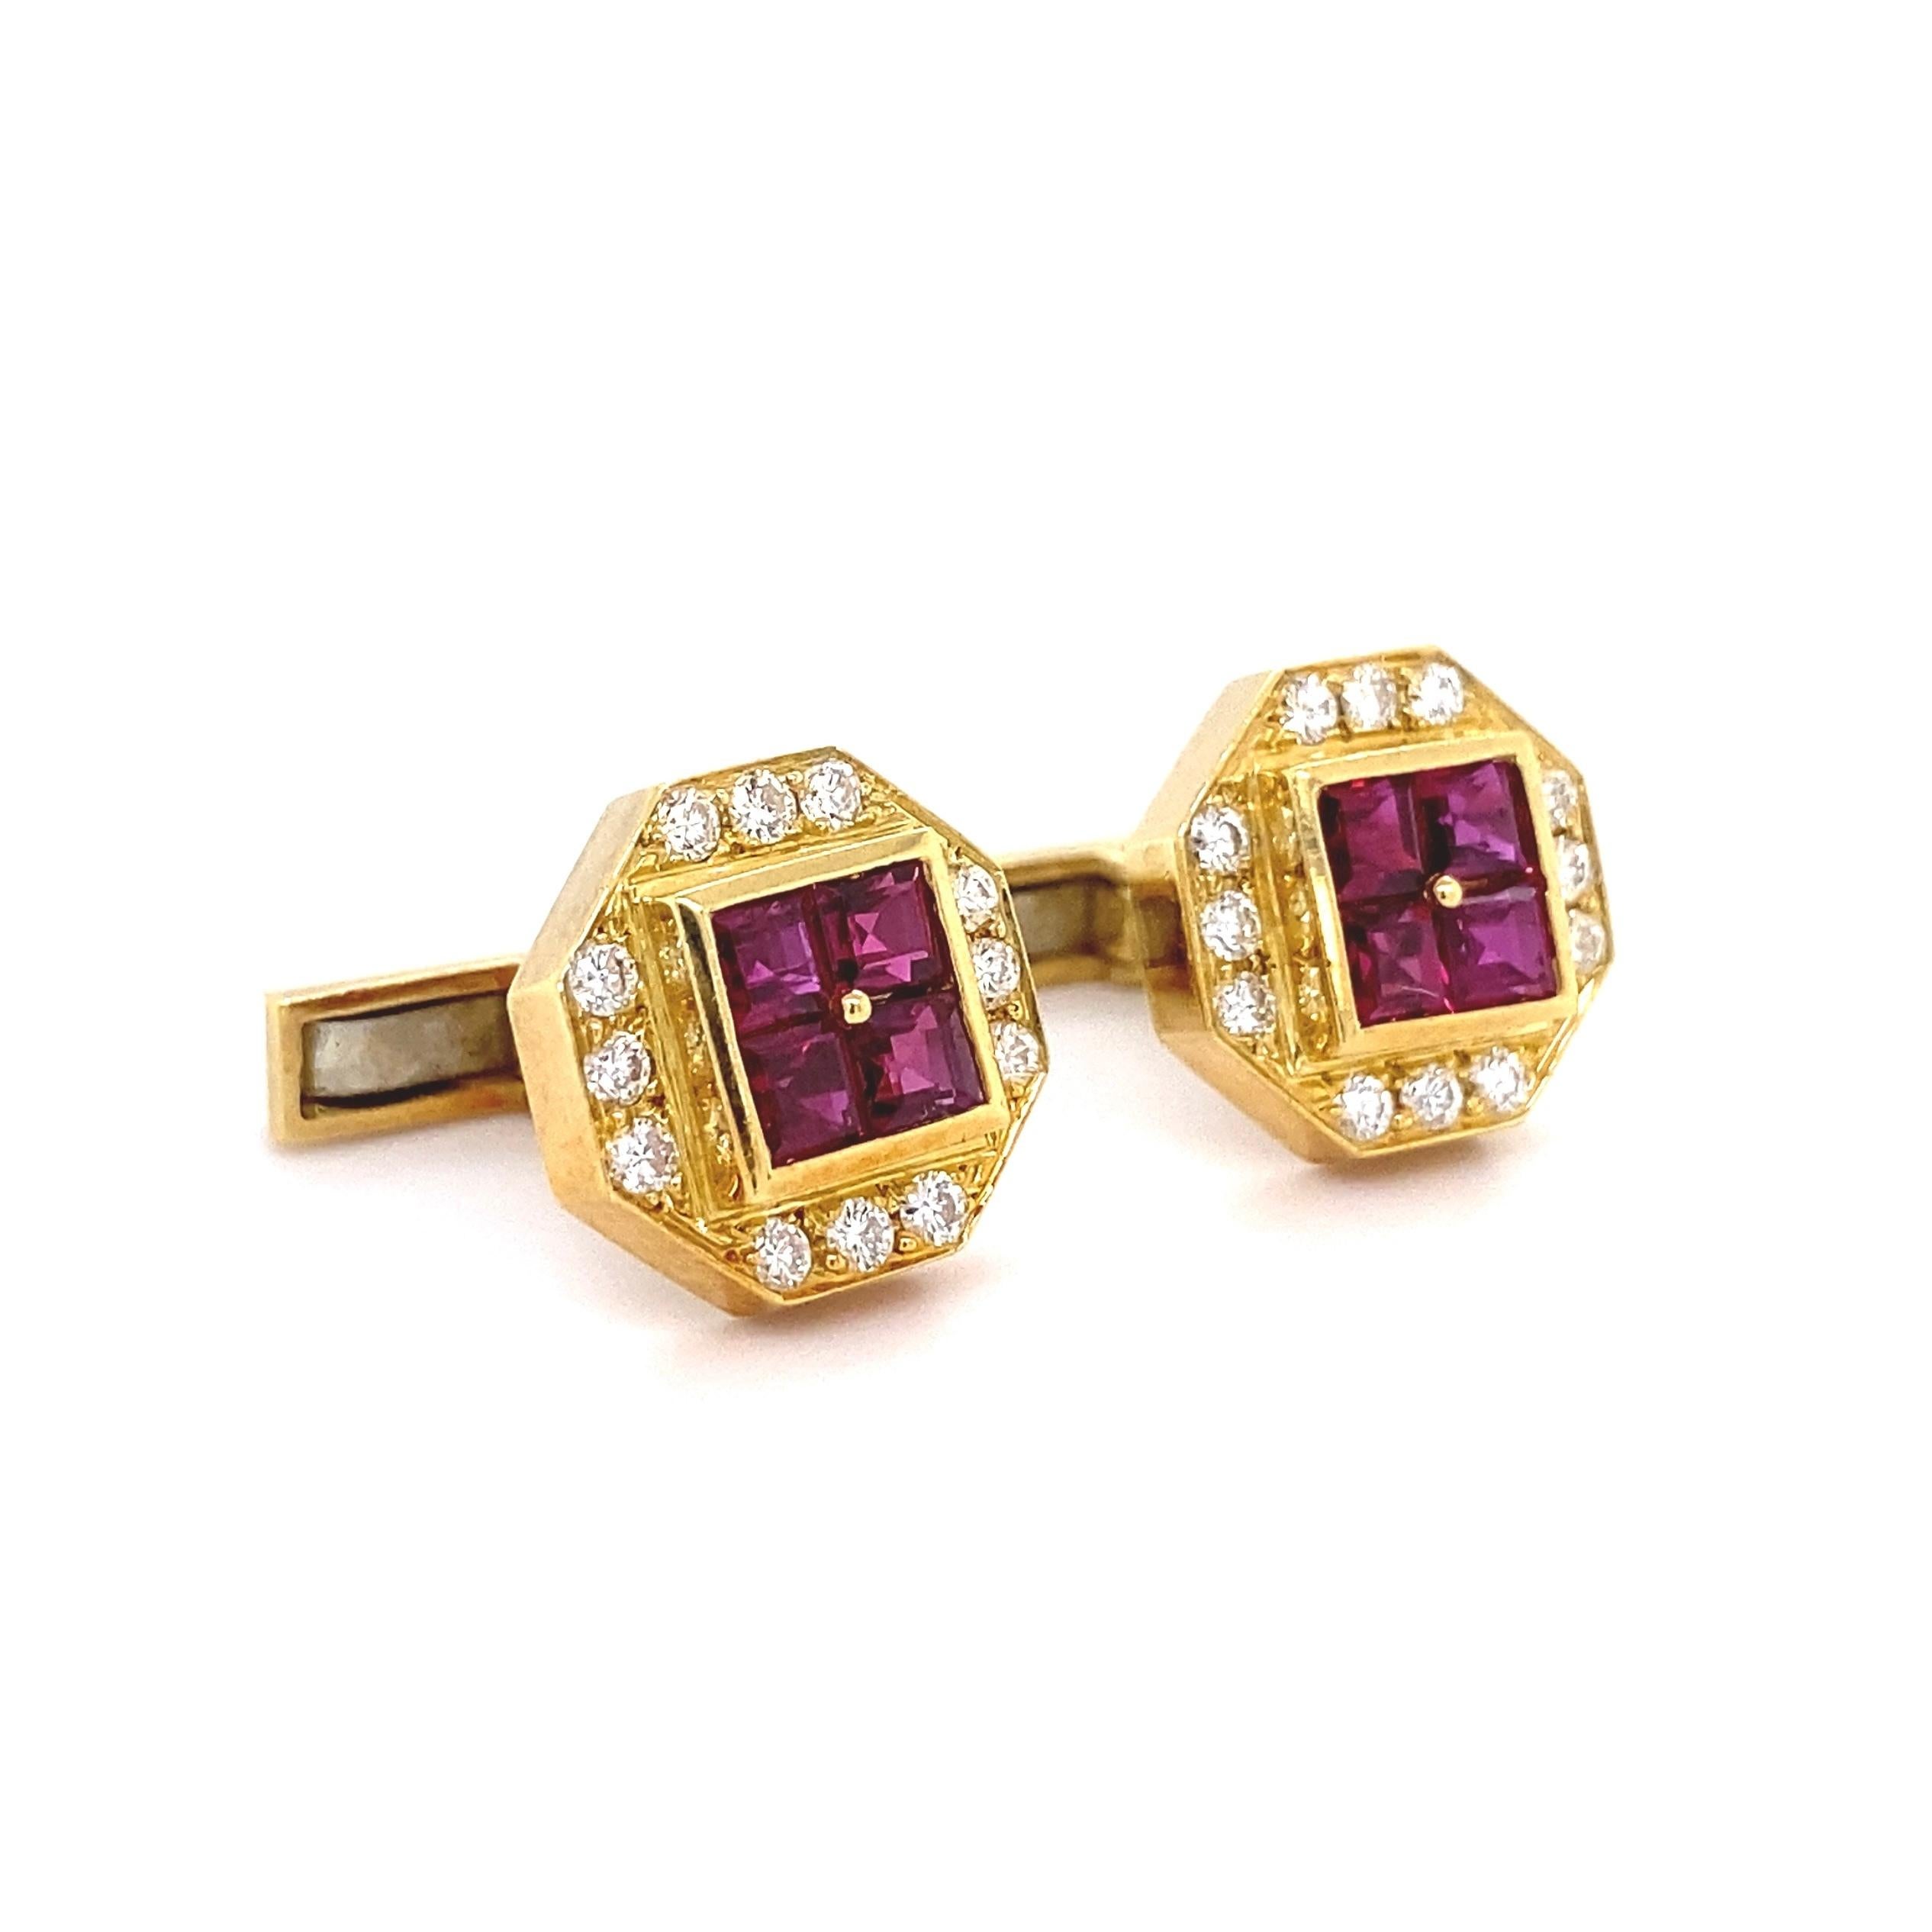 Awesome Ruby and Diamond Gold Cufflinks securely set with 8 Square Rubies, approx. 1.60tcw and 36 Brilliant cut Diamonds, approx. 1.00tcw. Beautifully Hand crafted in 18K Yellow Gold. Measuring approx. 0.52” x 0.51”. Classic and Stylish...For that